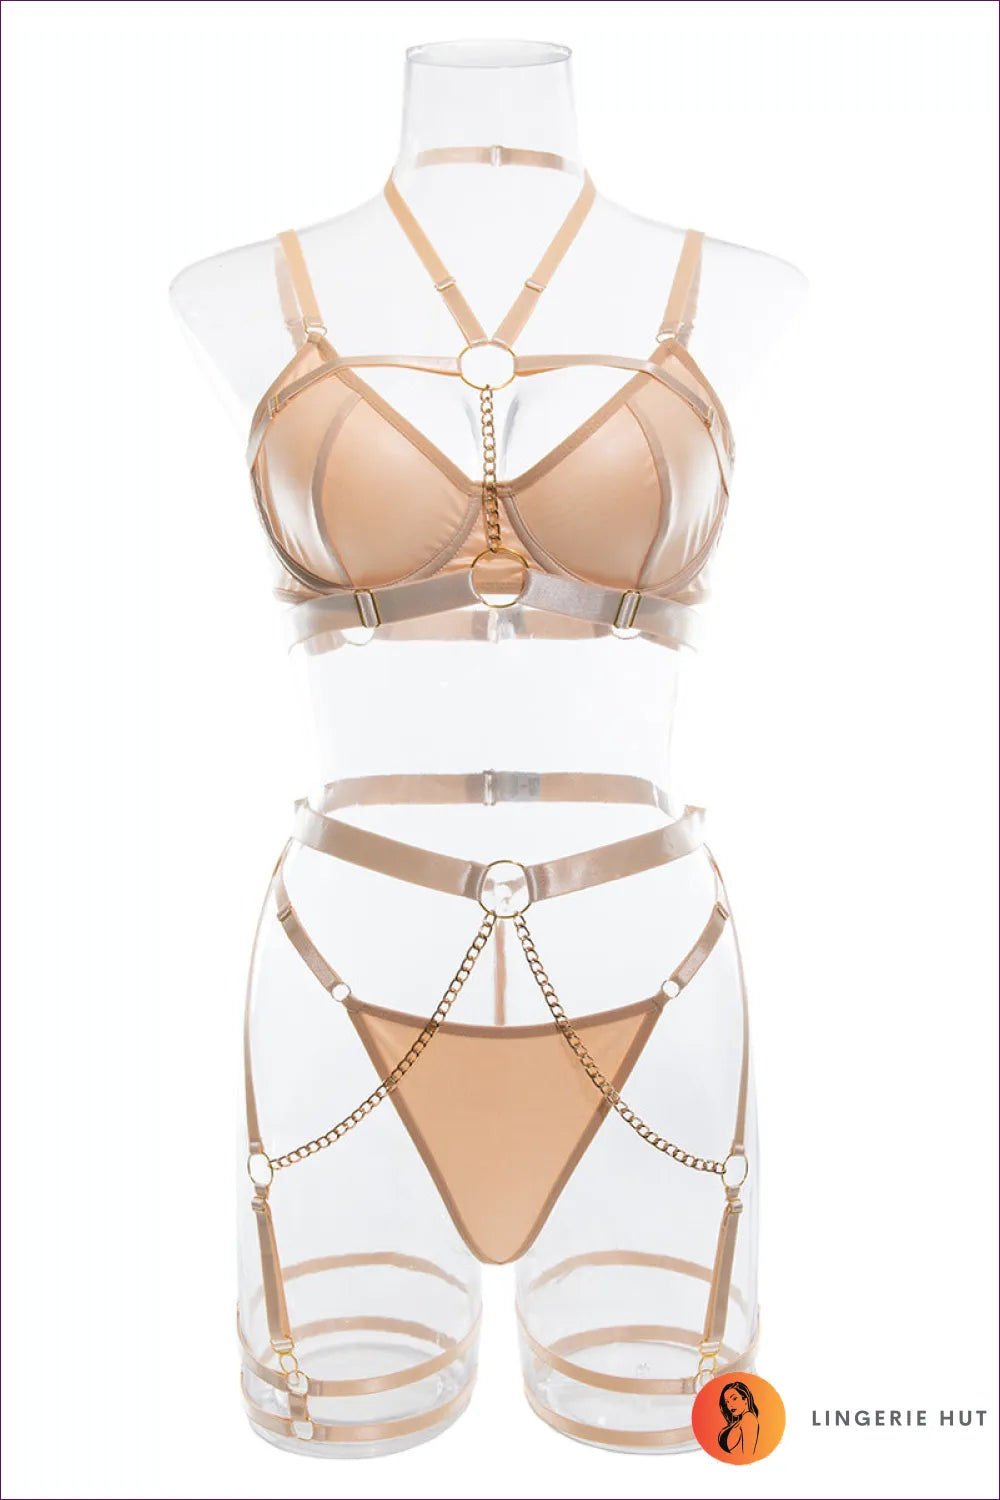 Embrace Your Bold Side Today 🛍️ Add The Elegant Cutout Bra Set To Your Lingerie Drawer And Step Into a World